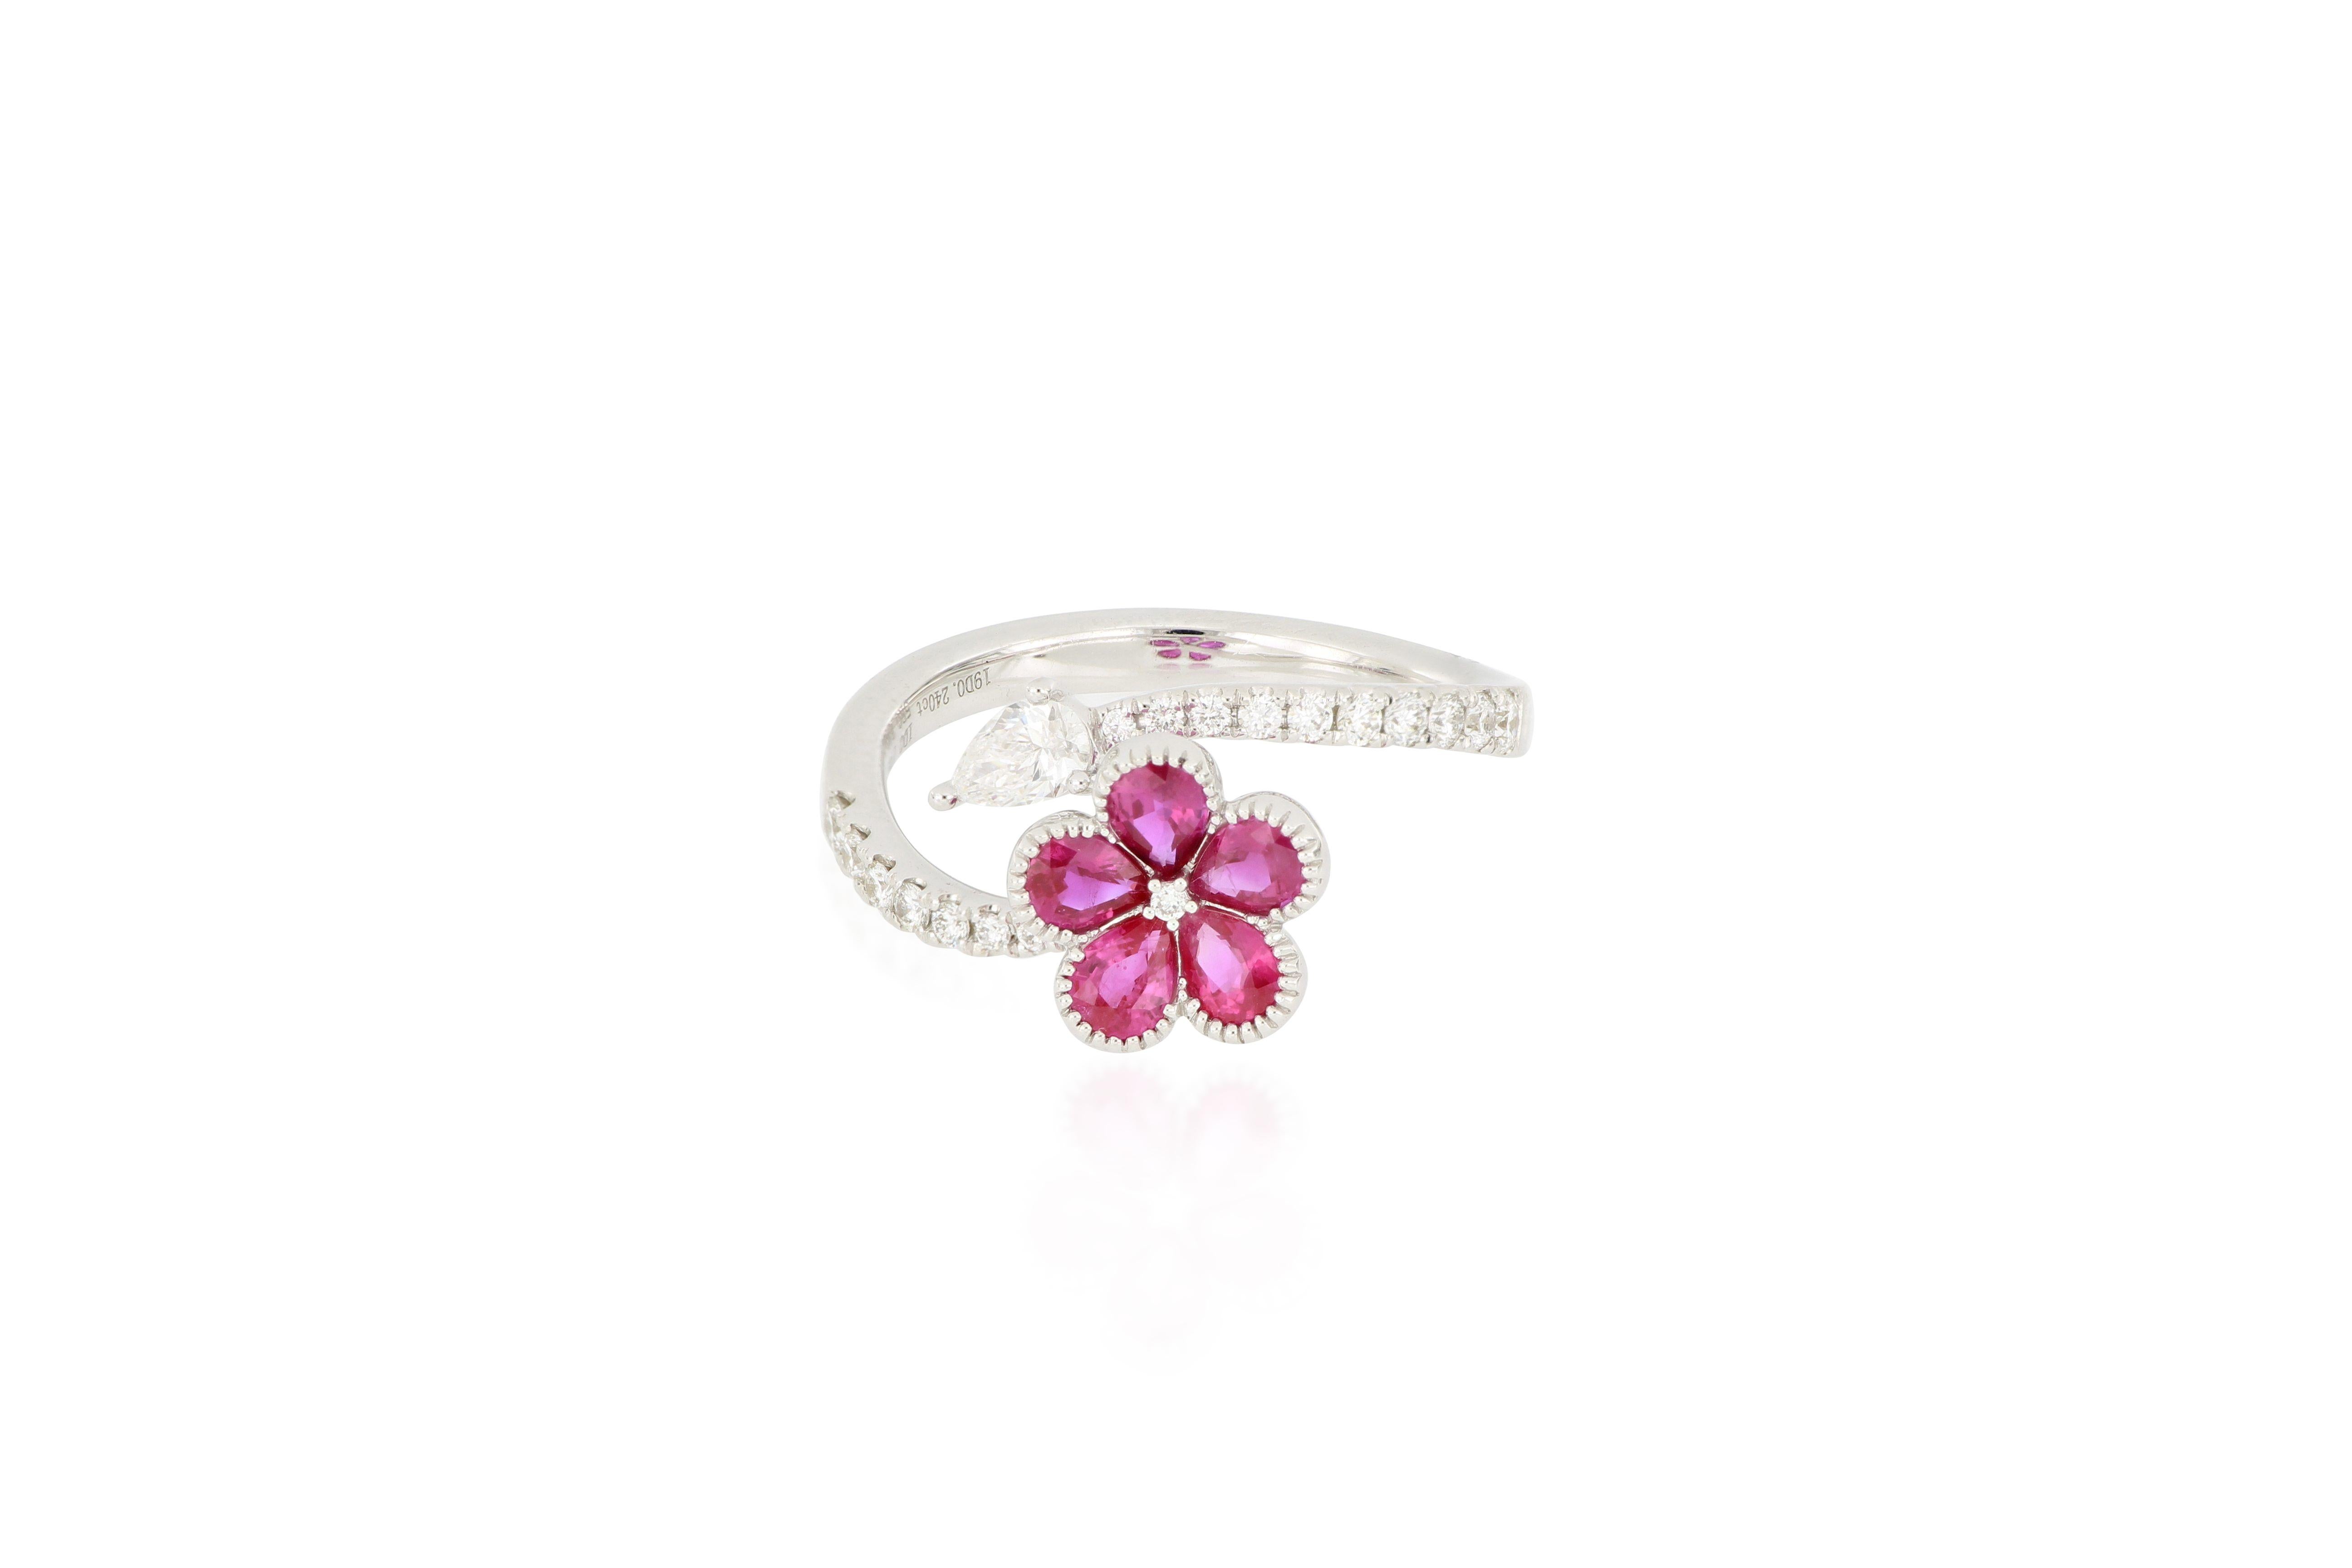 A graceful ruby and diamond ring, natural ruby totalling 0.84cts, brilliant diamonds totalling 0.41cts, mounted in 18 Karat white gold. A very stylish ring which can be worn for any occasion.
The brand is renowned for its high jewellery collections